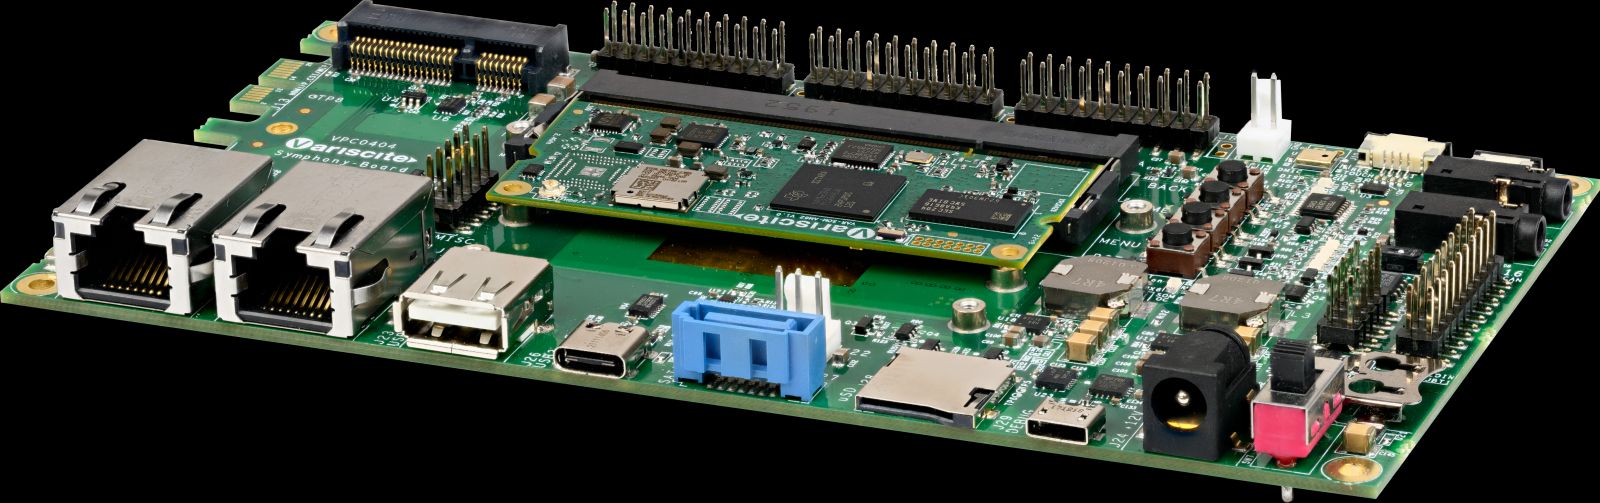 Variscite Launches New System on Module Powered by Texas Instruments’ AM62x from only $33